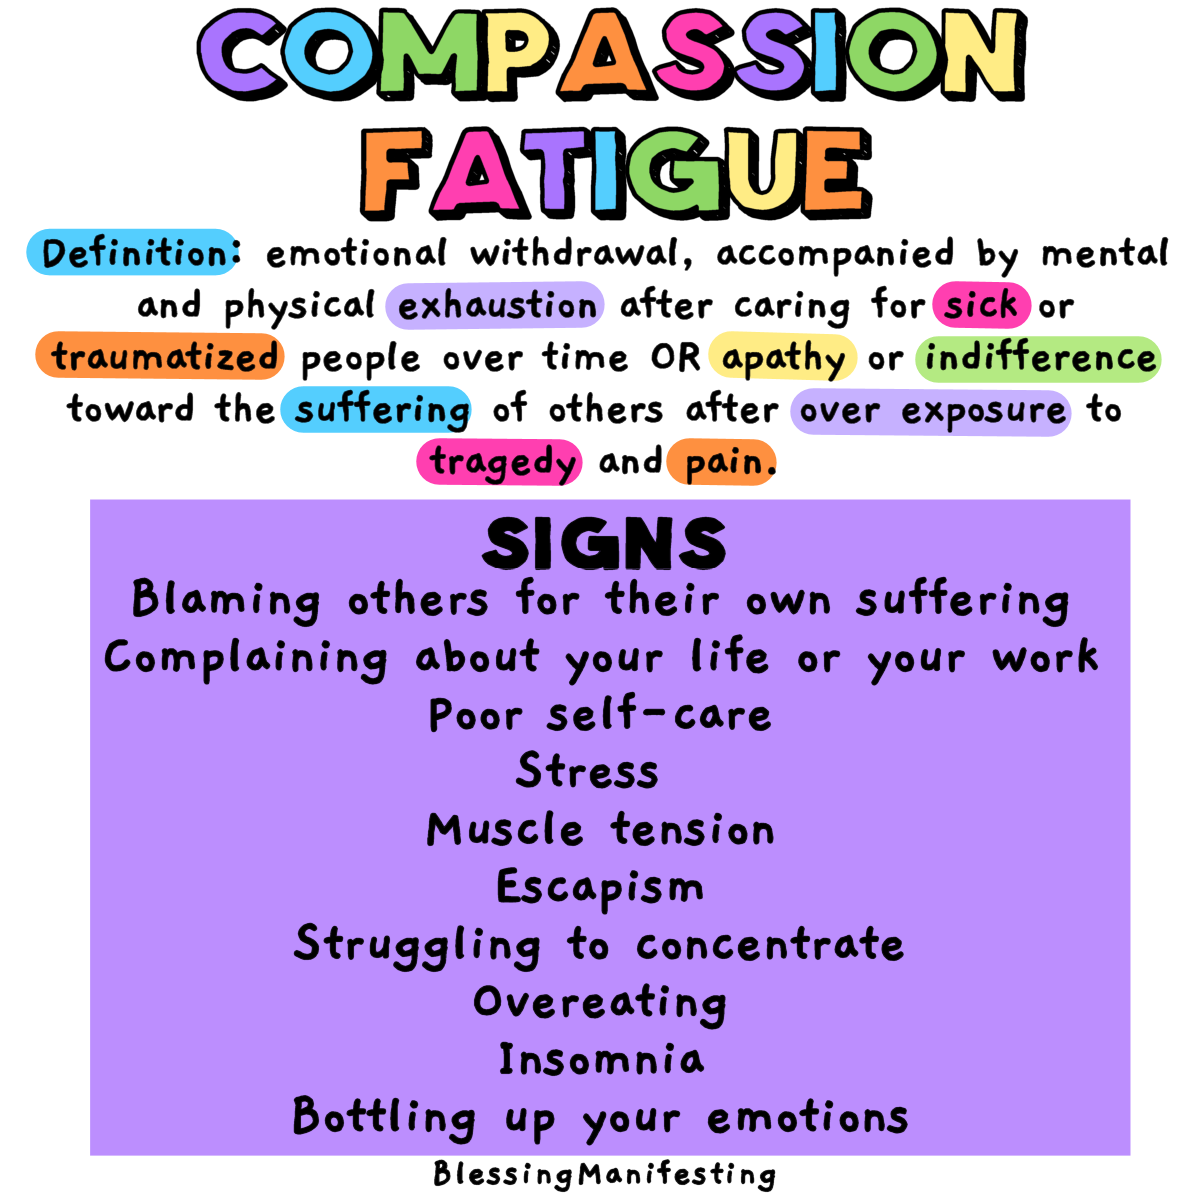 How to Combat Compassion Fatigue